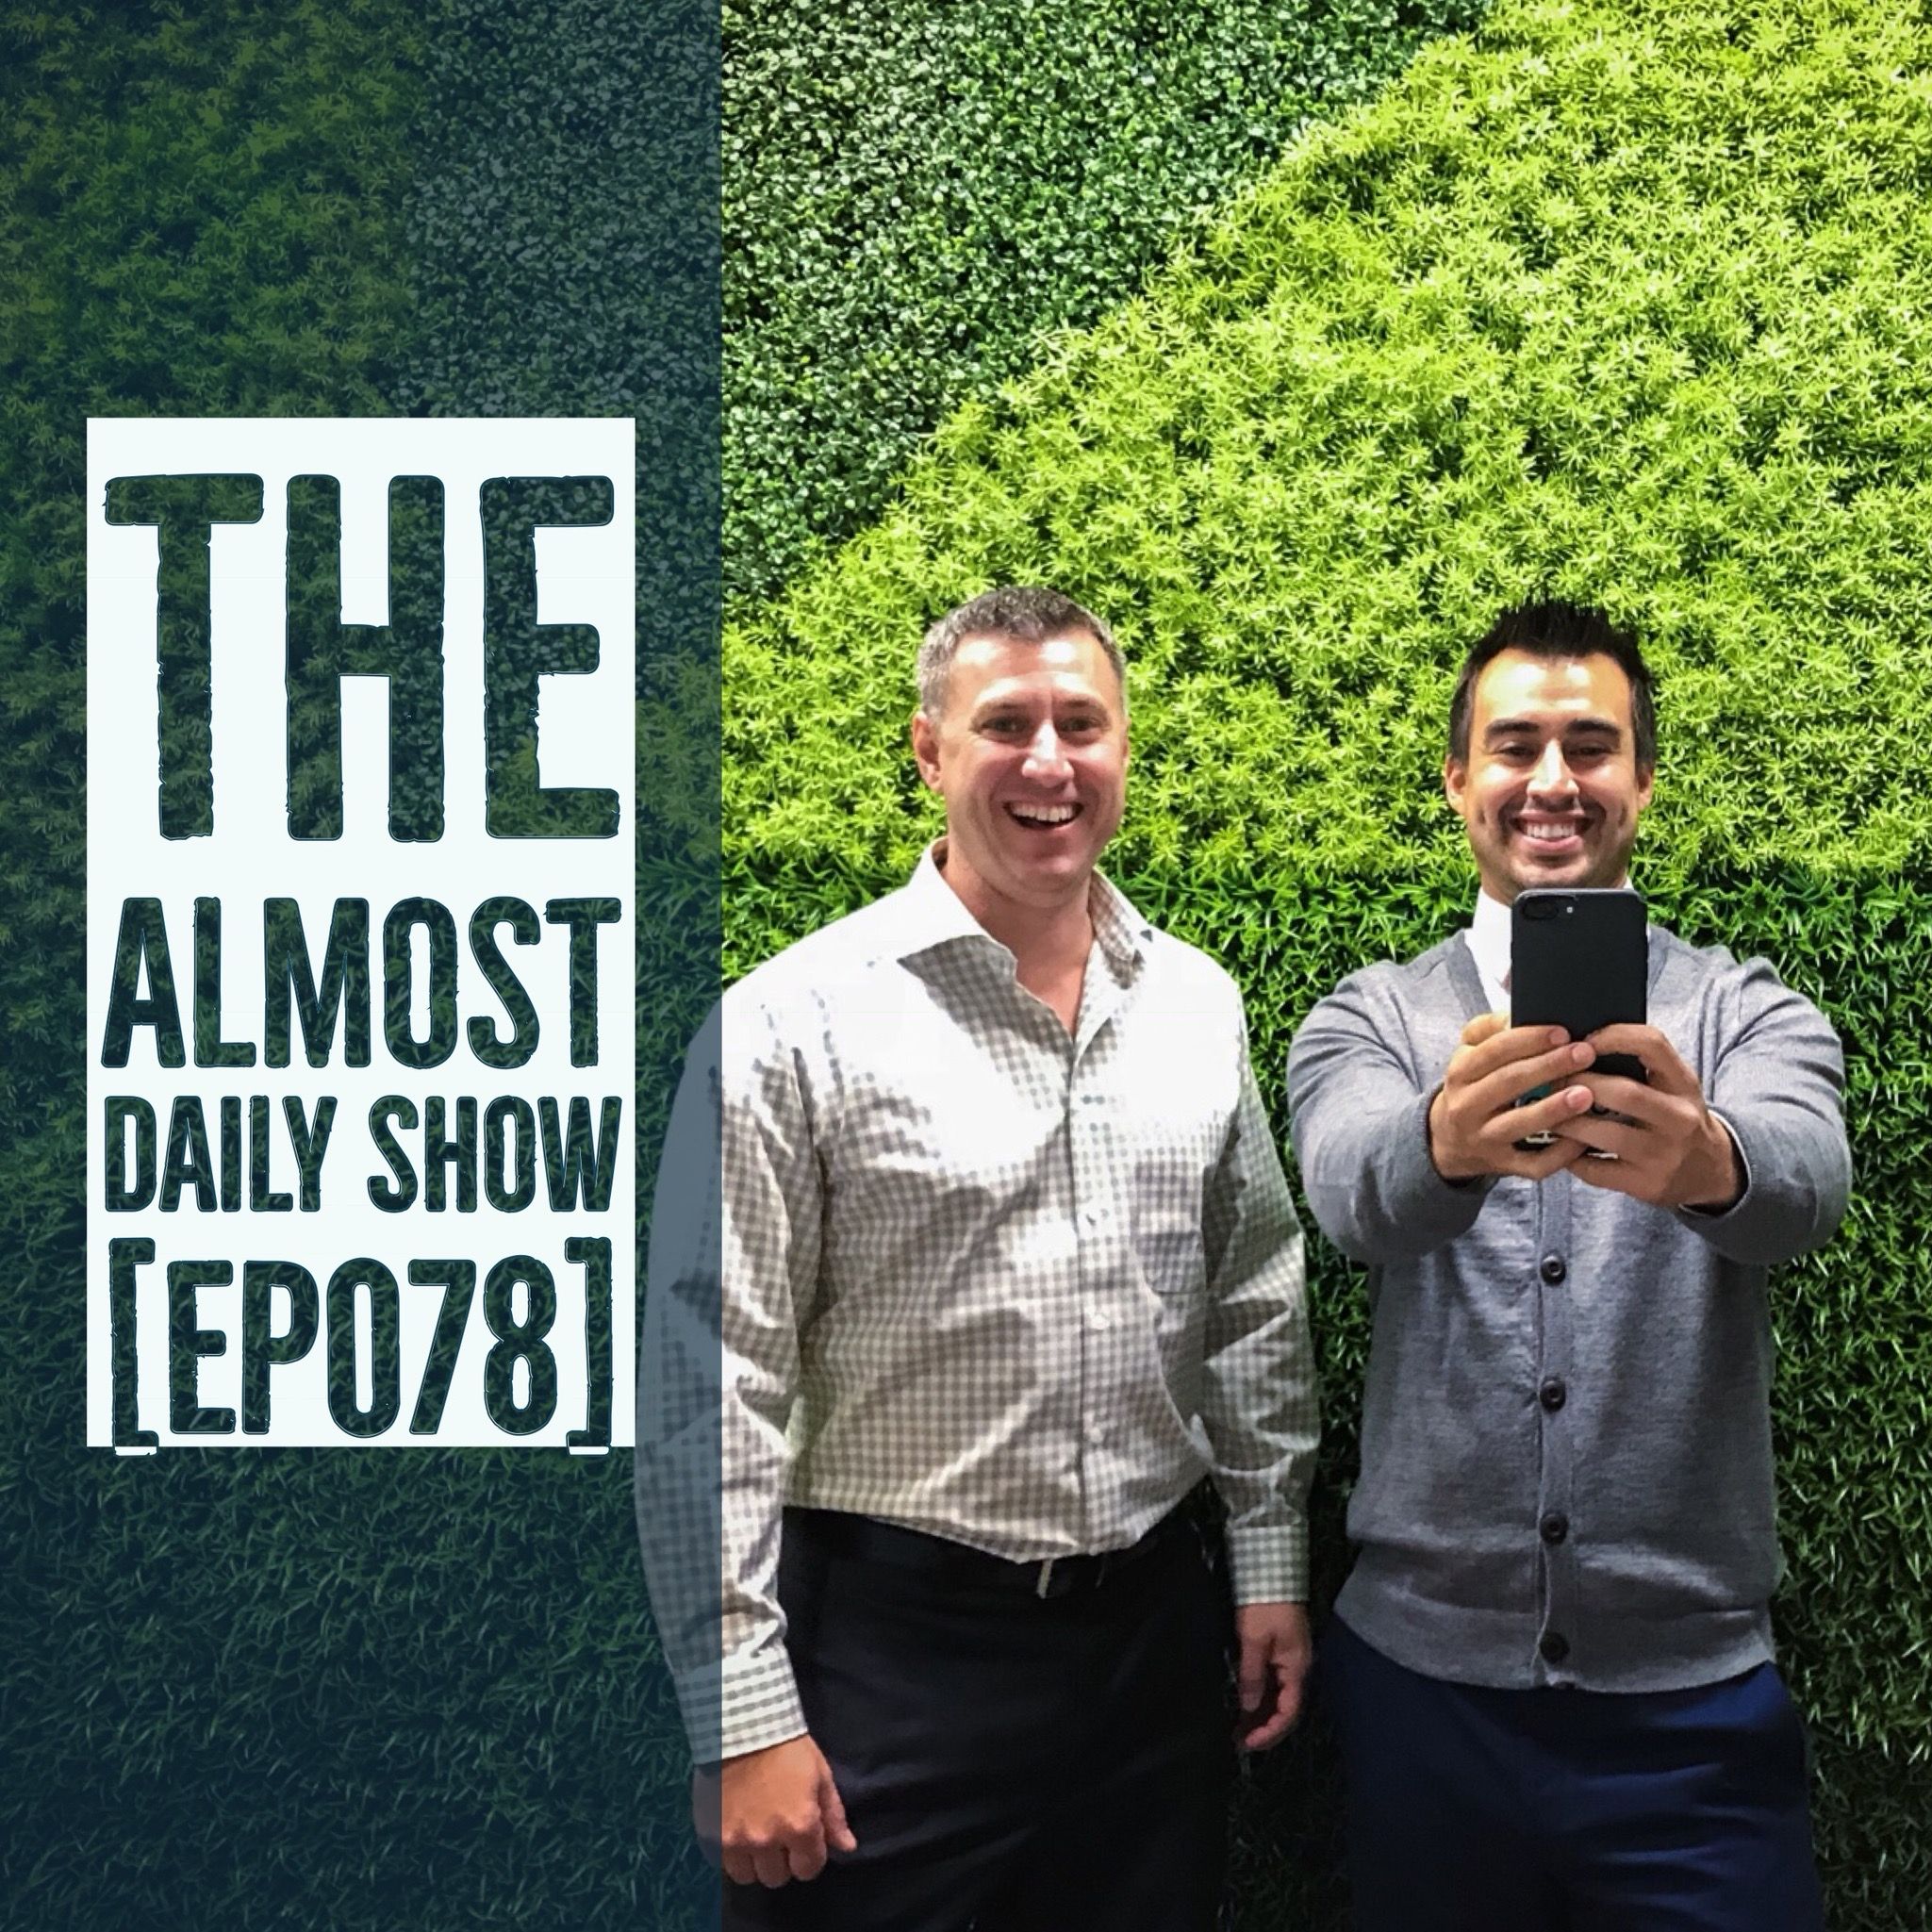 New Year Marketing | The Almost Daily Show Ep 78